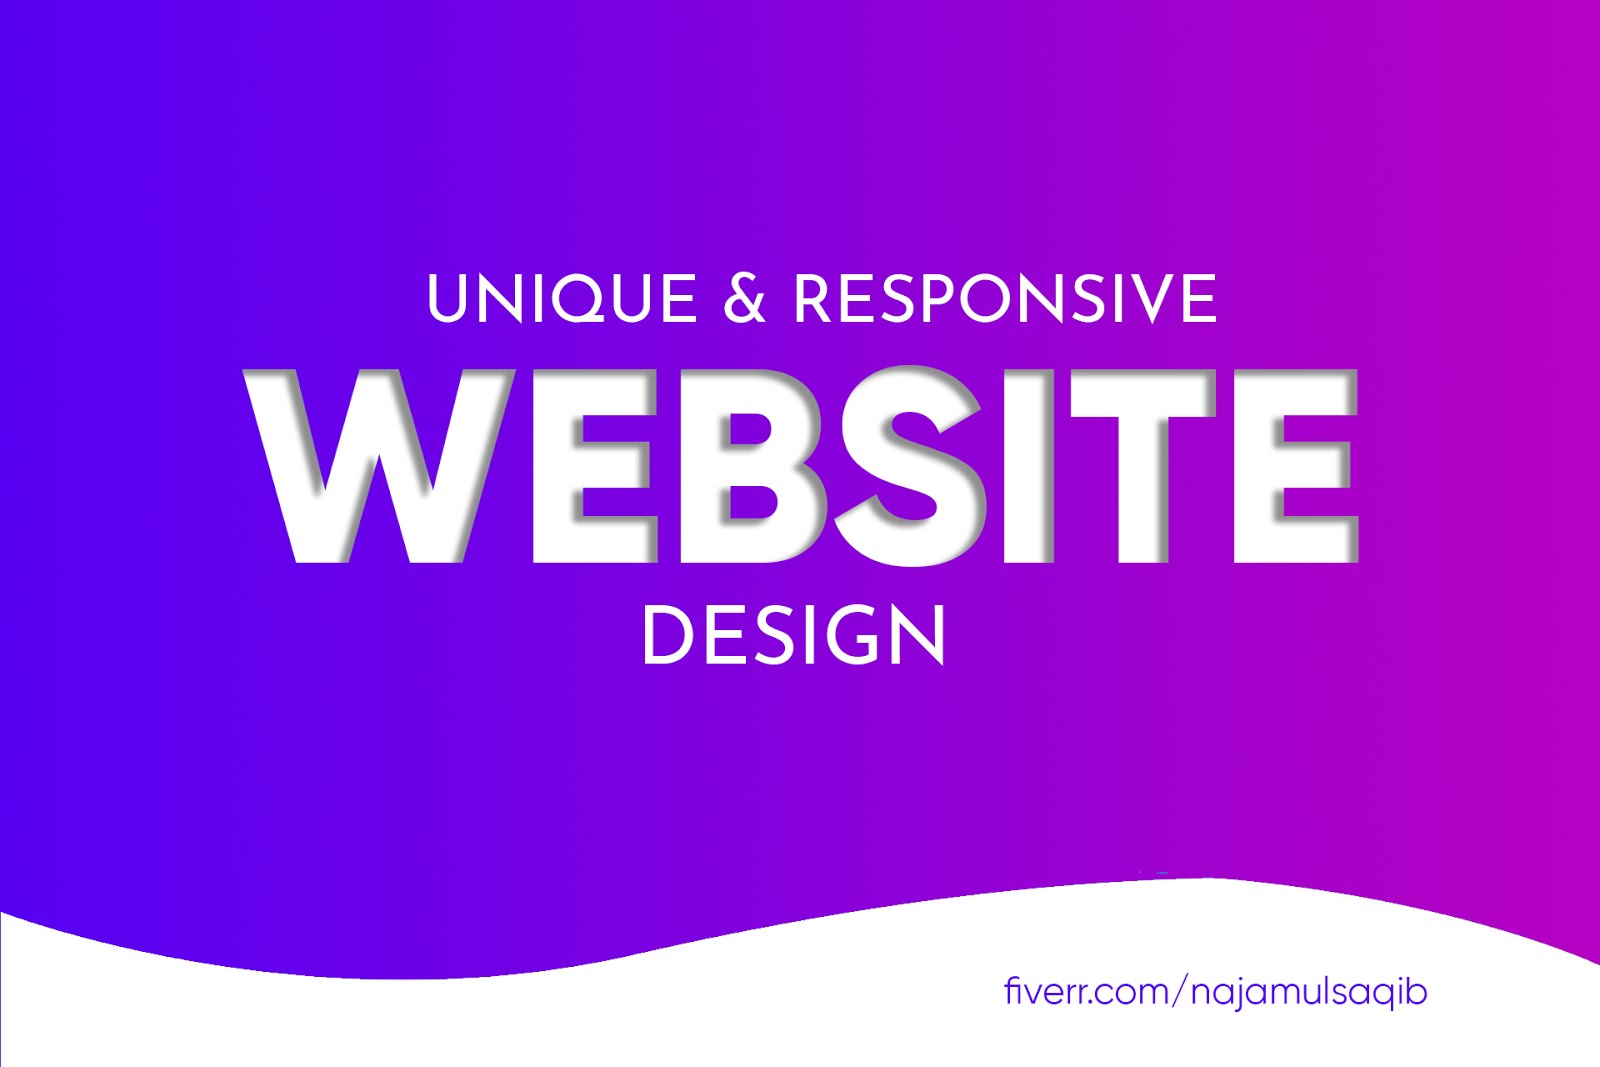 Do you need a website for your business or company?